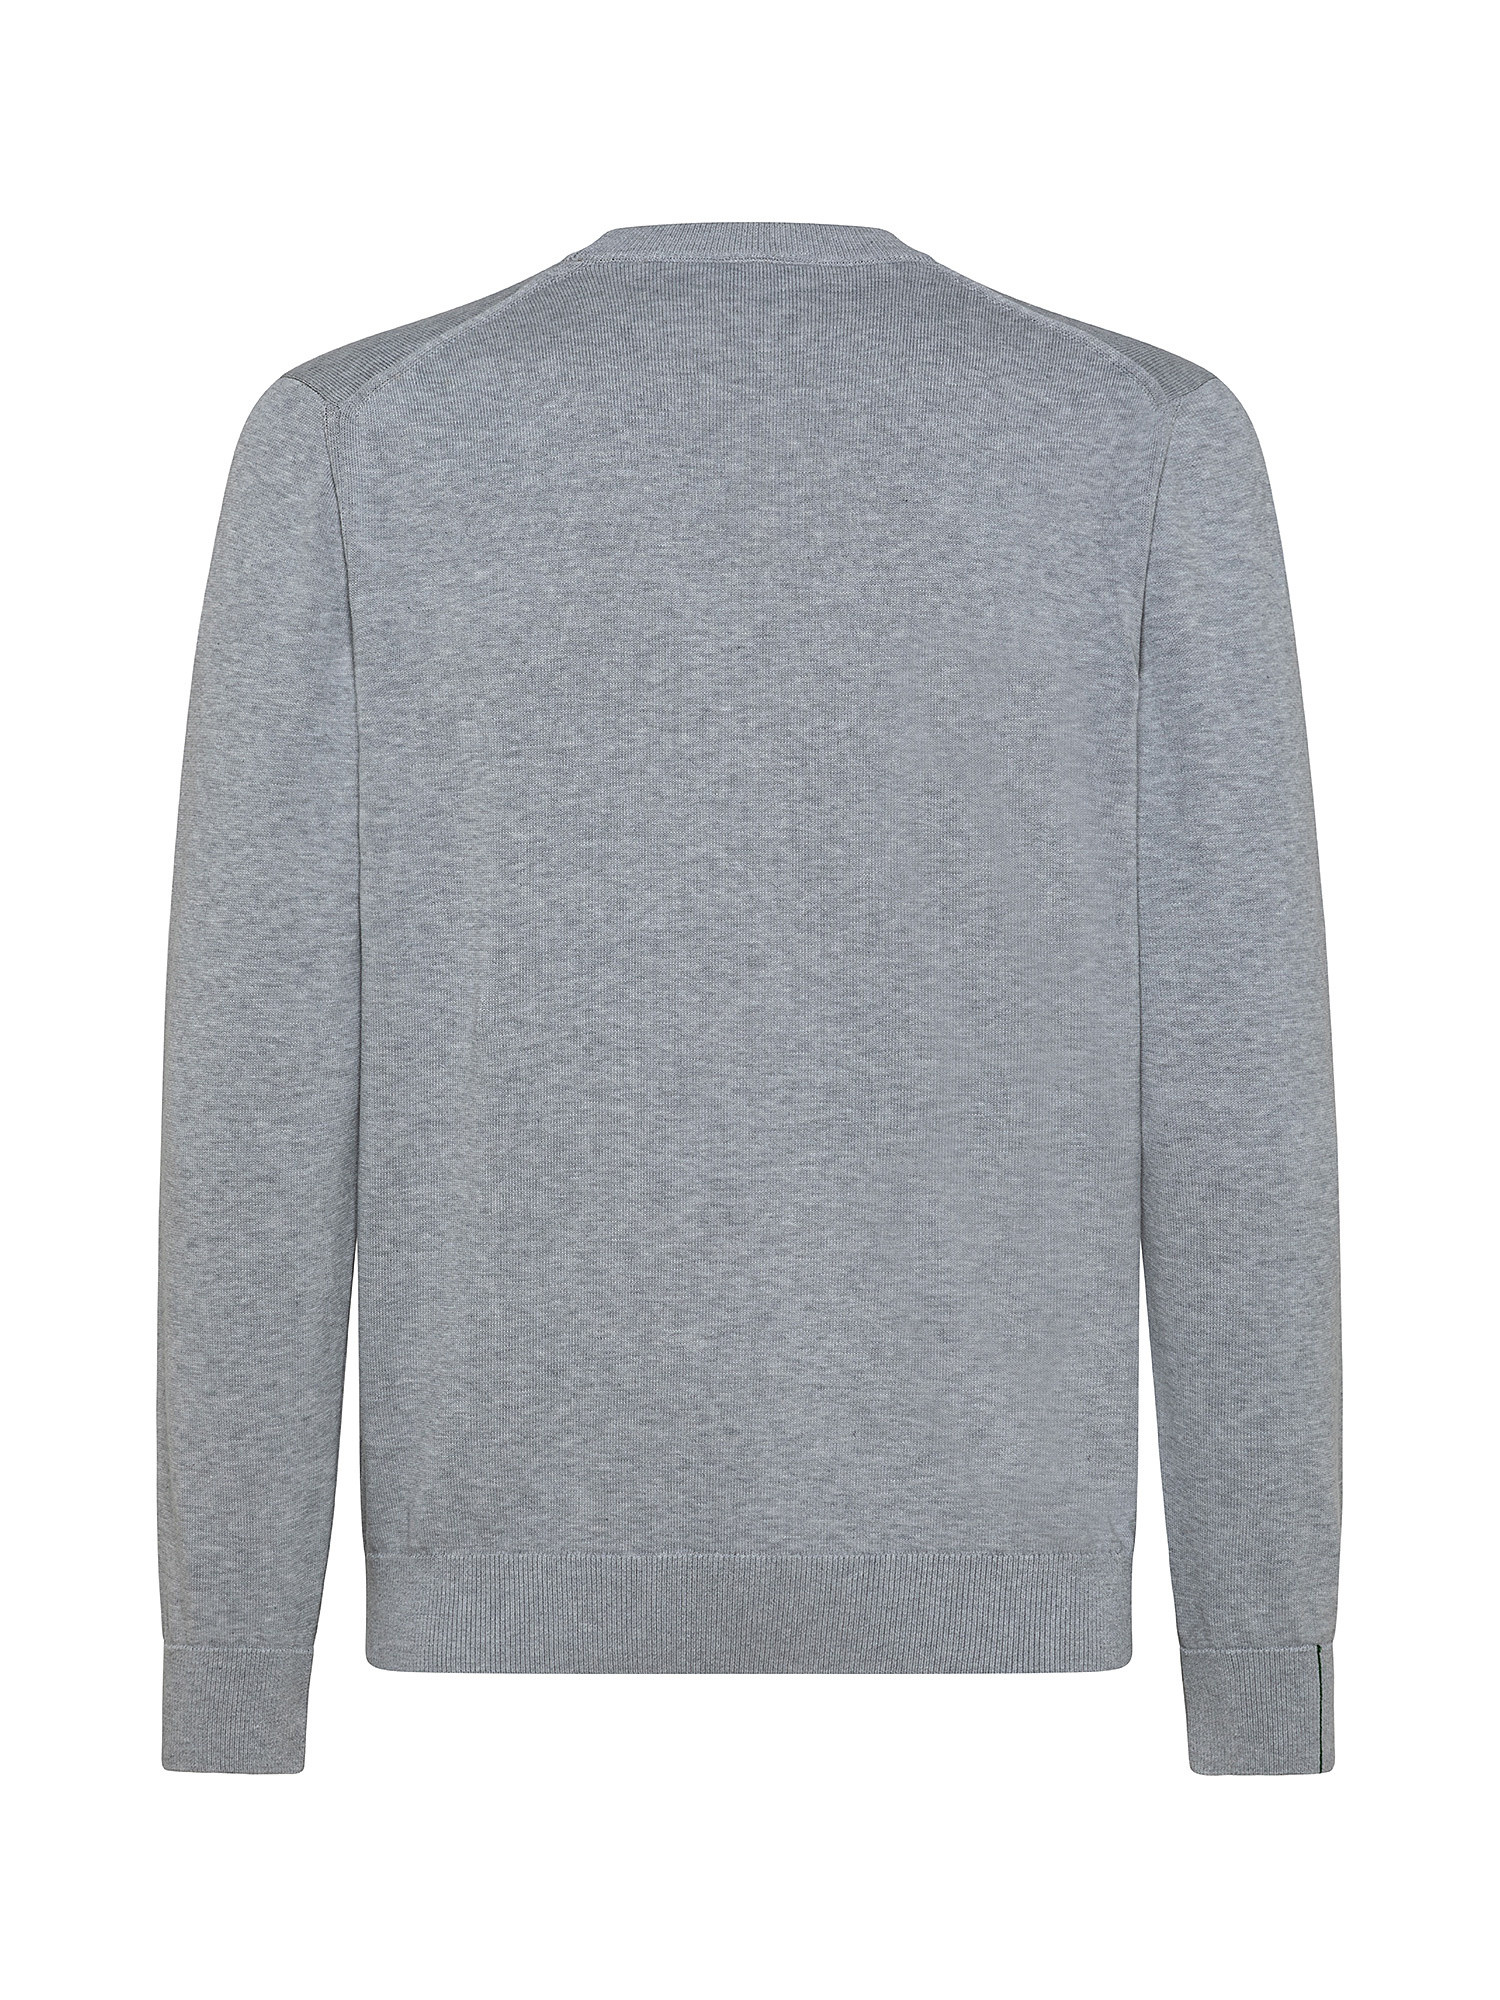 Pullover, Grey, large image number 1